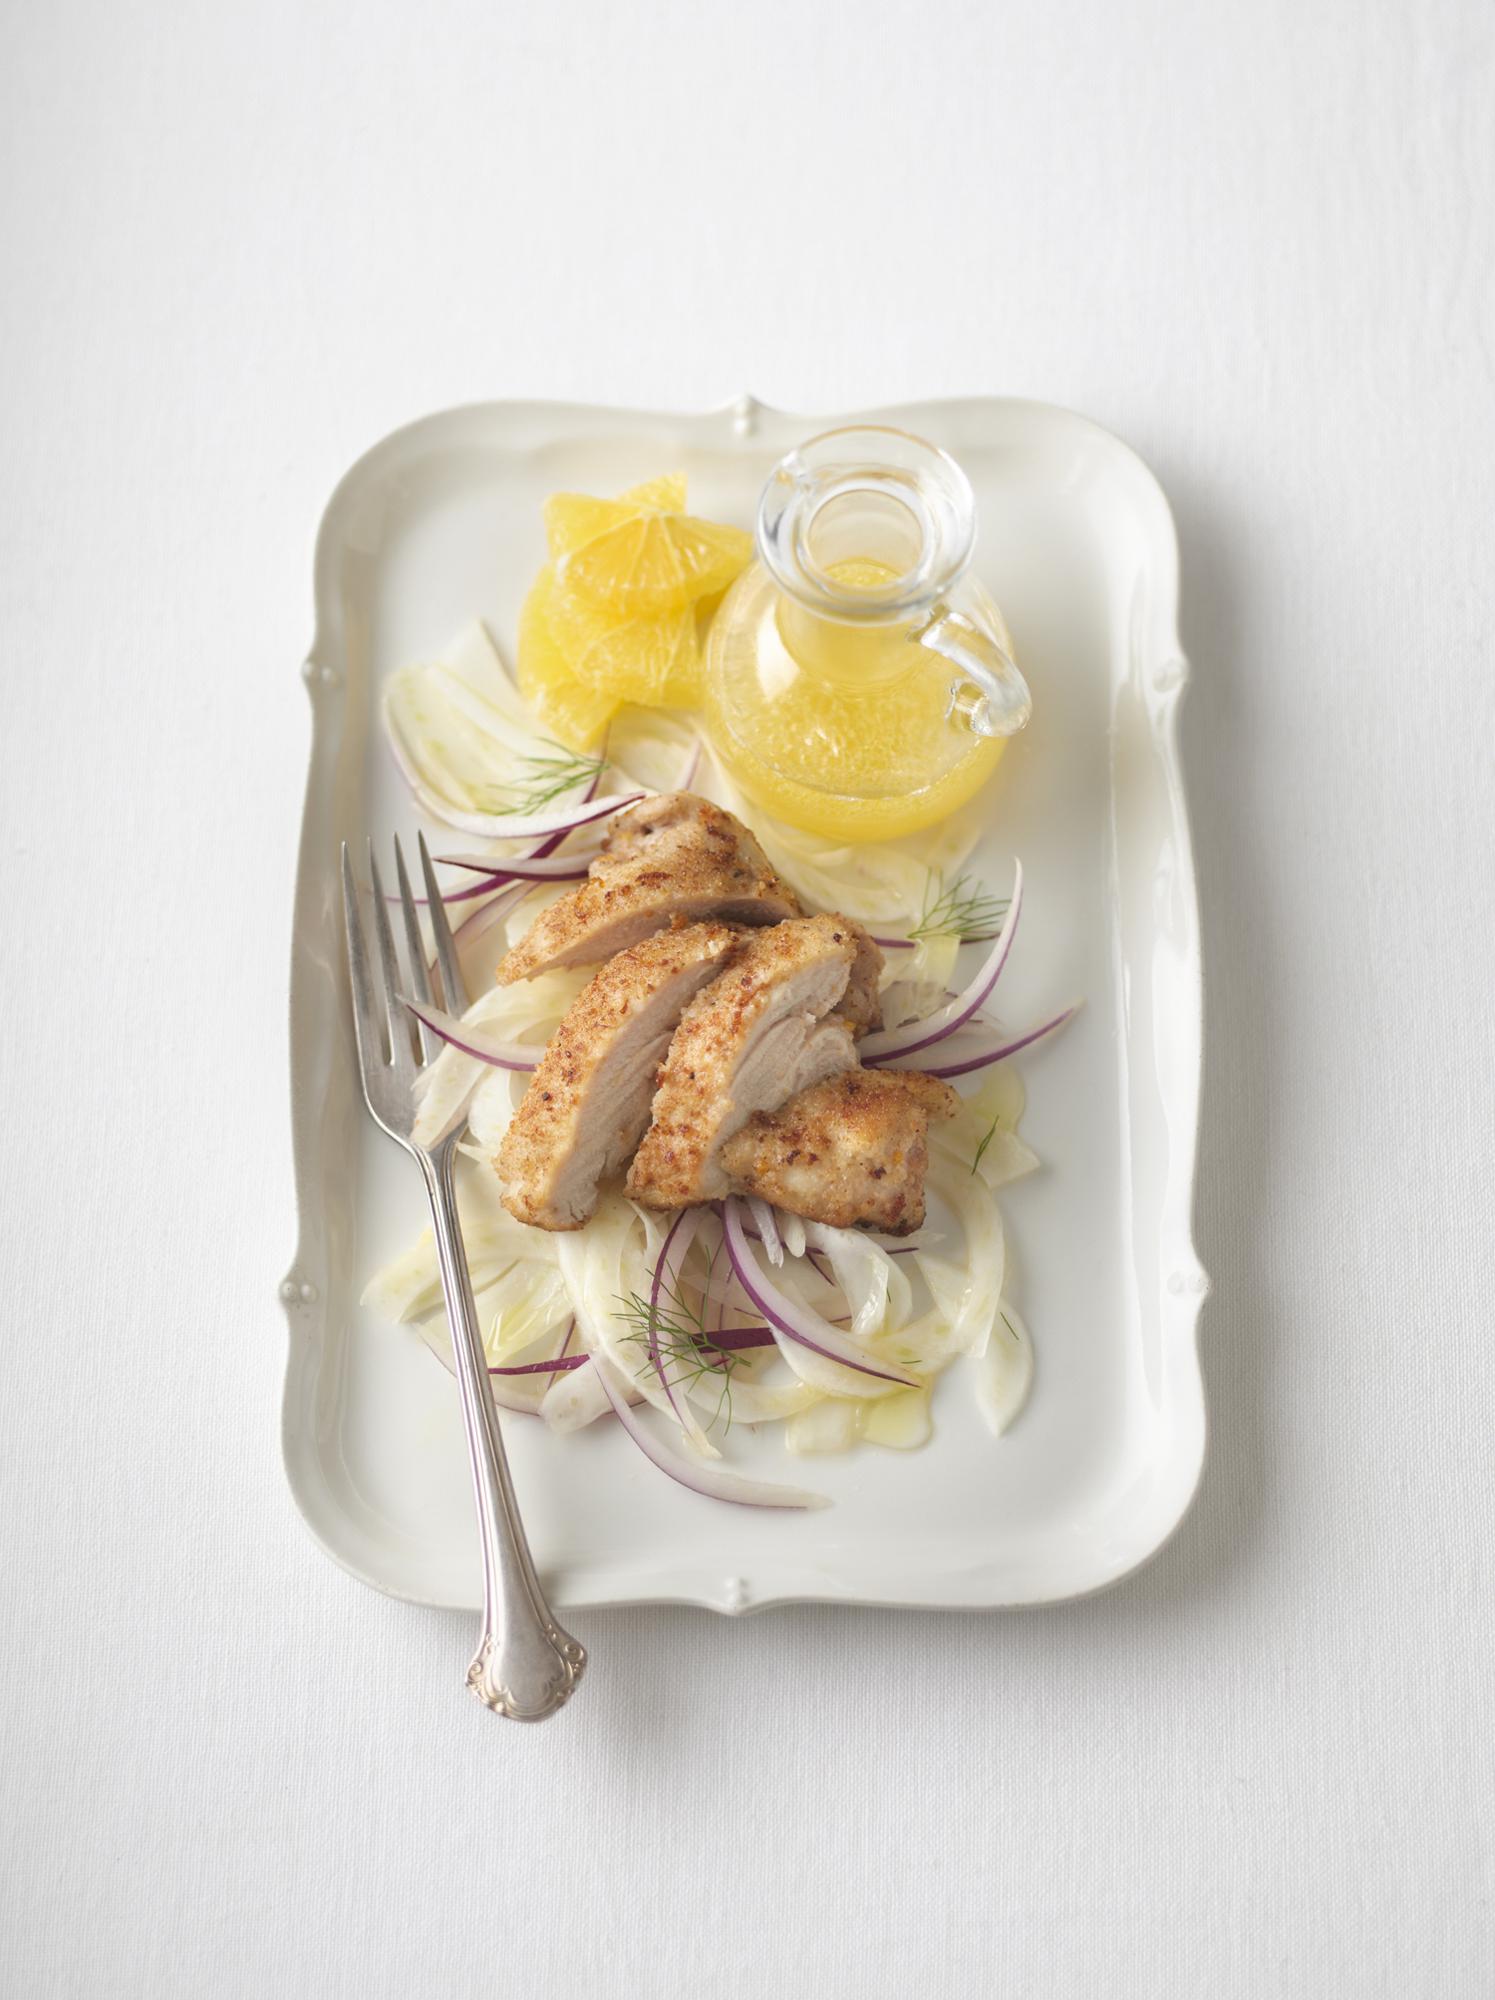 Pan-Fried Orange Chicken with Fennel & Onion Salad - Just Bare Foods